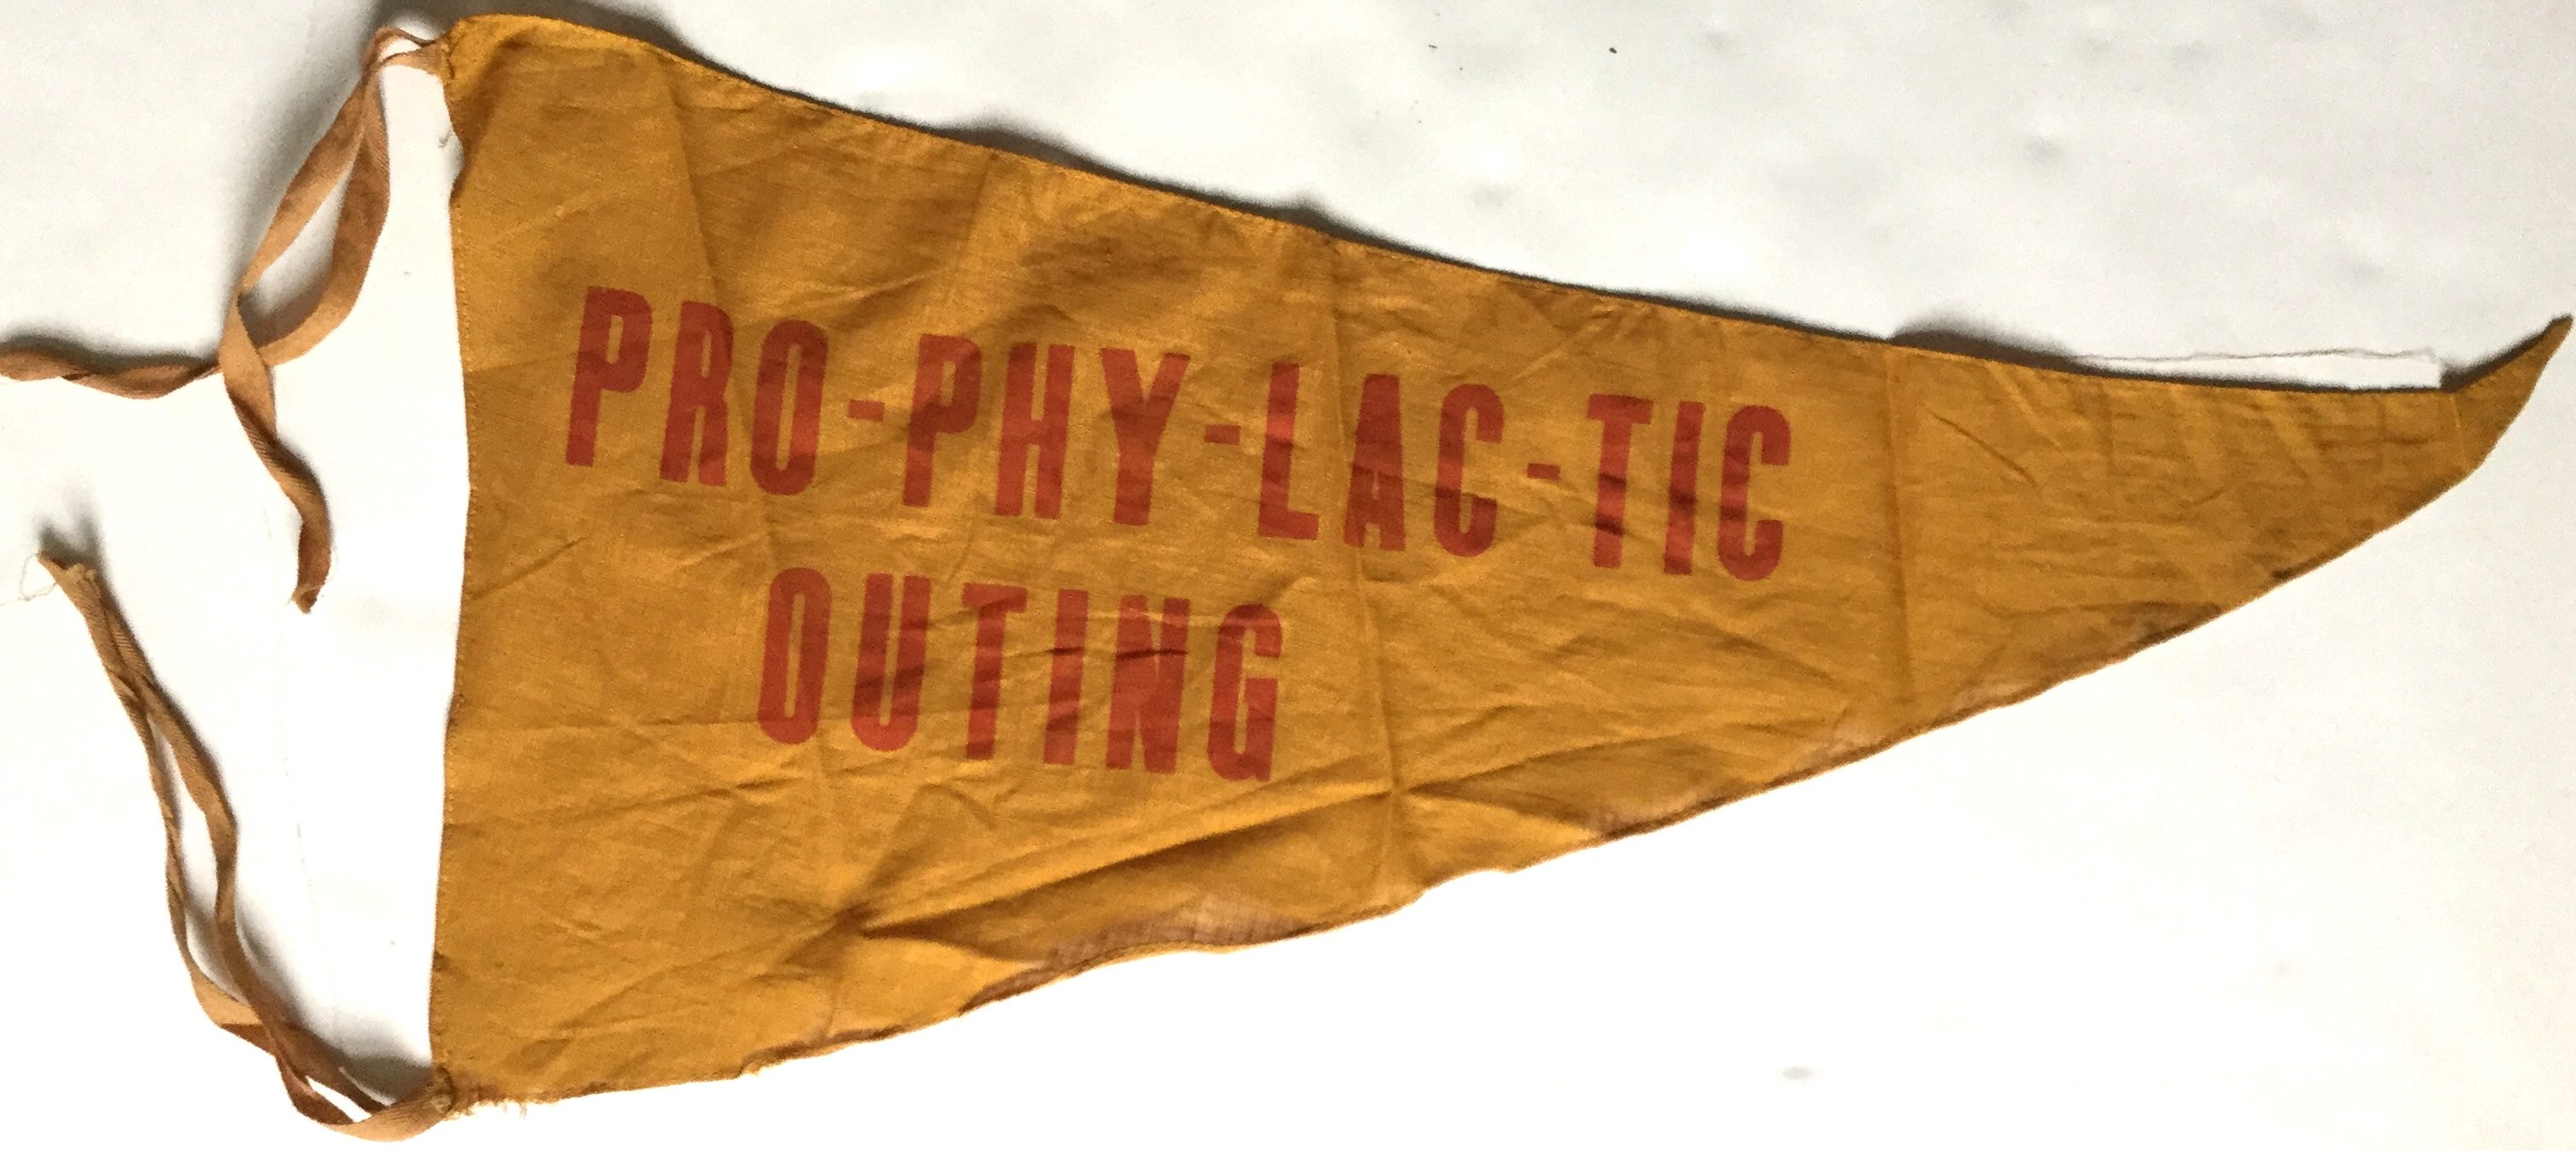 J520	PRO-PHY-LAC-TIC BANNER